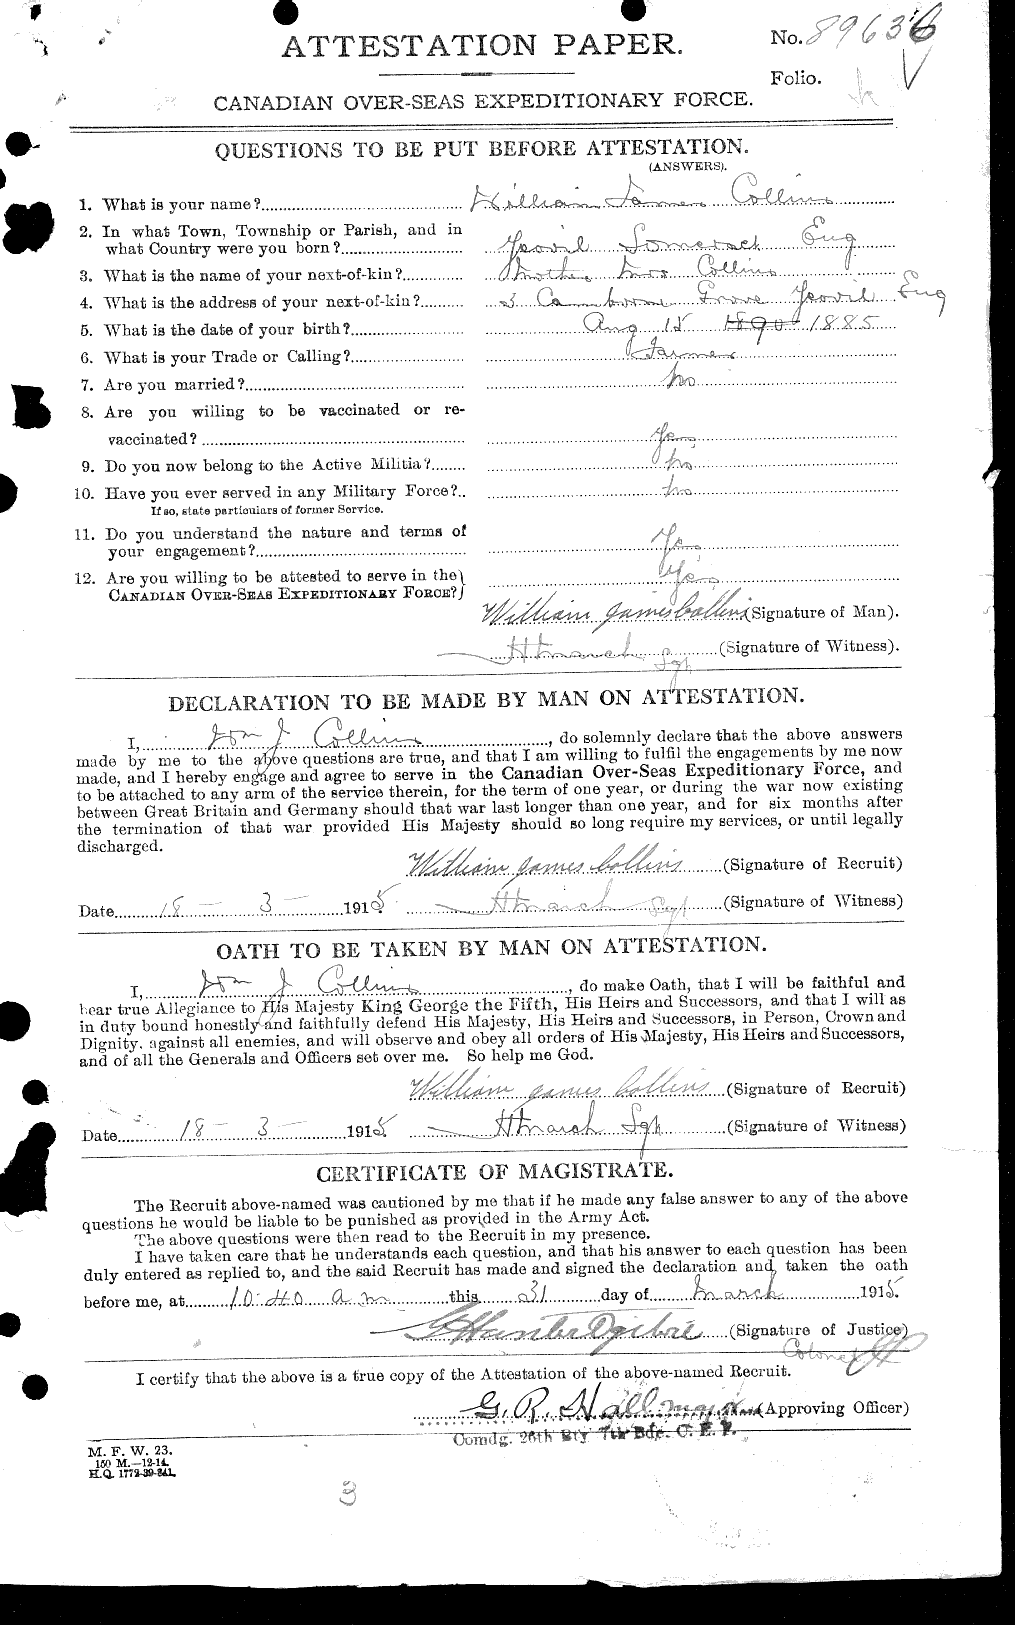 Personnel Records of the First World War - CEF 034612a